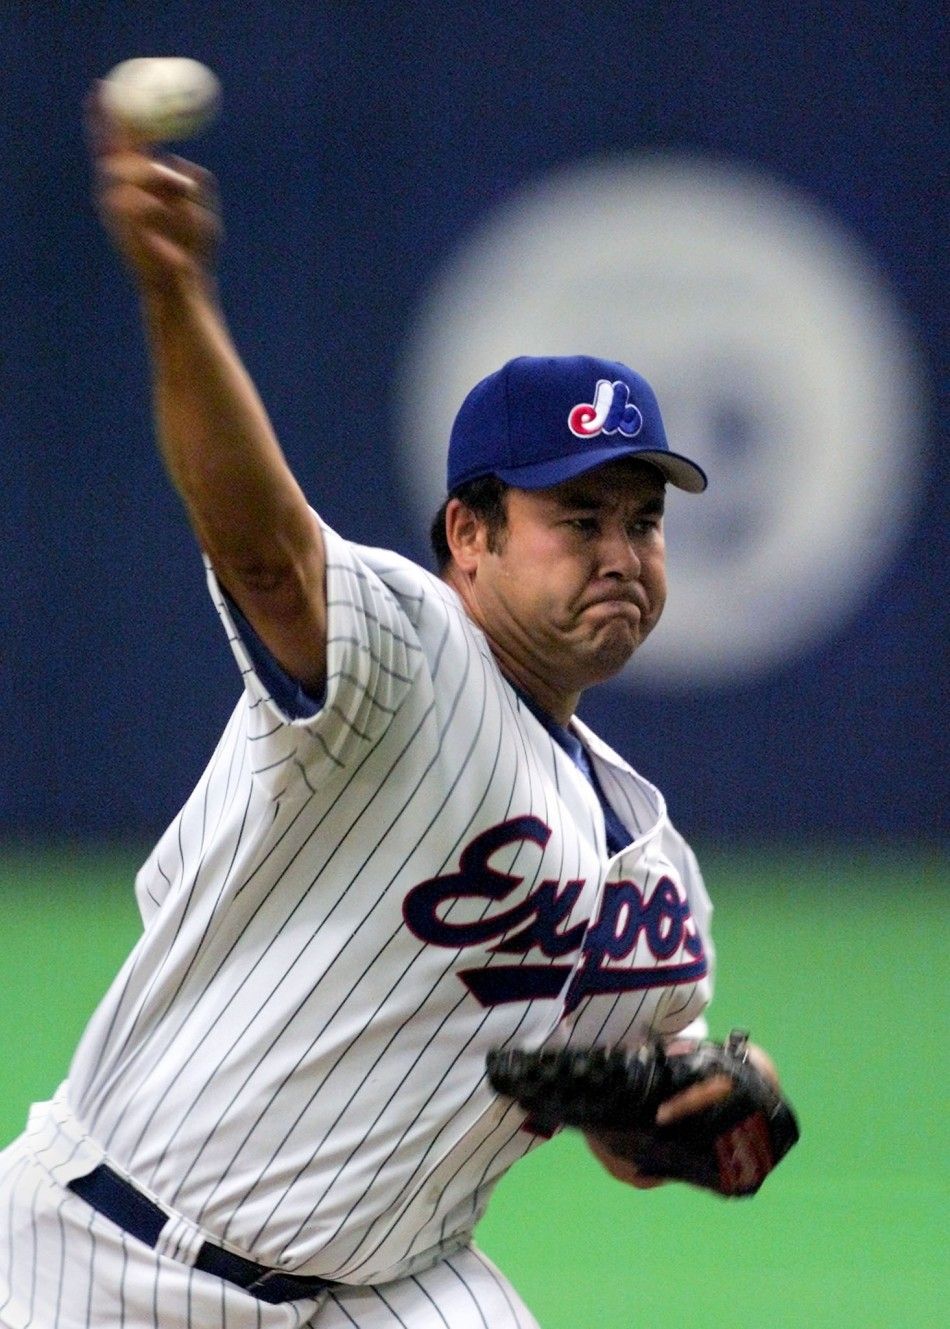 Montreal Expos039 starting pitcher Hideki Irabu delivers a pitch during the first inning of action against the Los Angeles Dodgers in Montreal, April 4. Irabu is making his first appearance as an Expo since being acquired from the New York Yankees in t